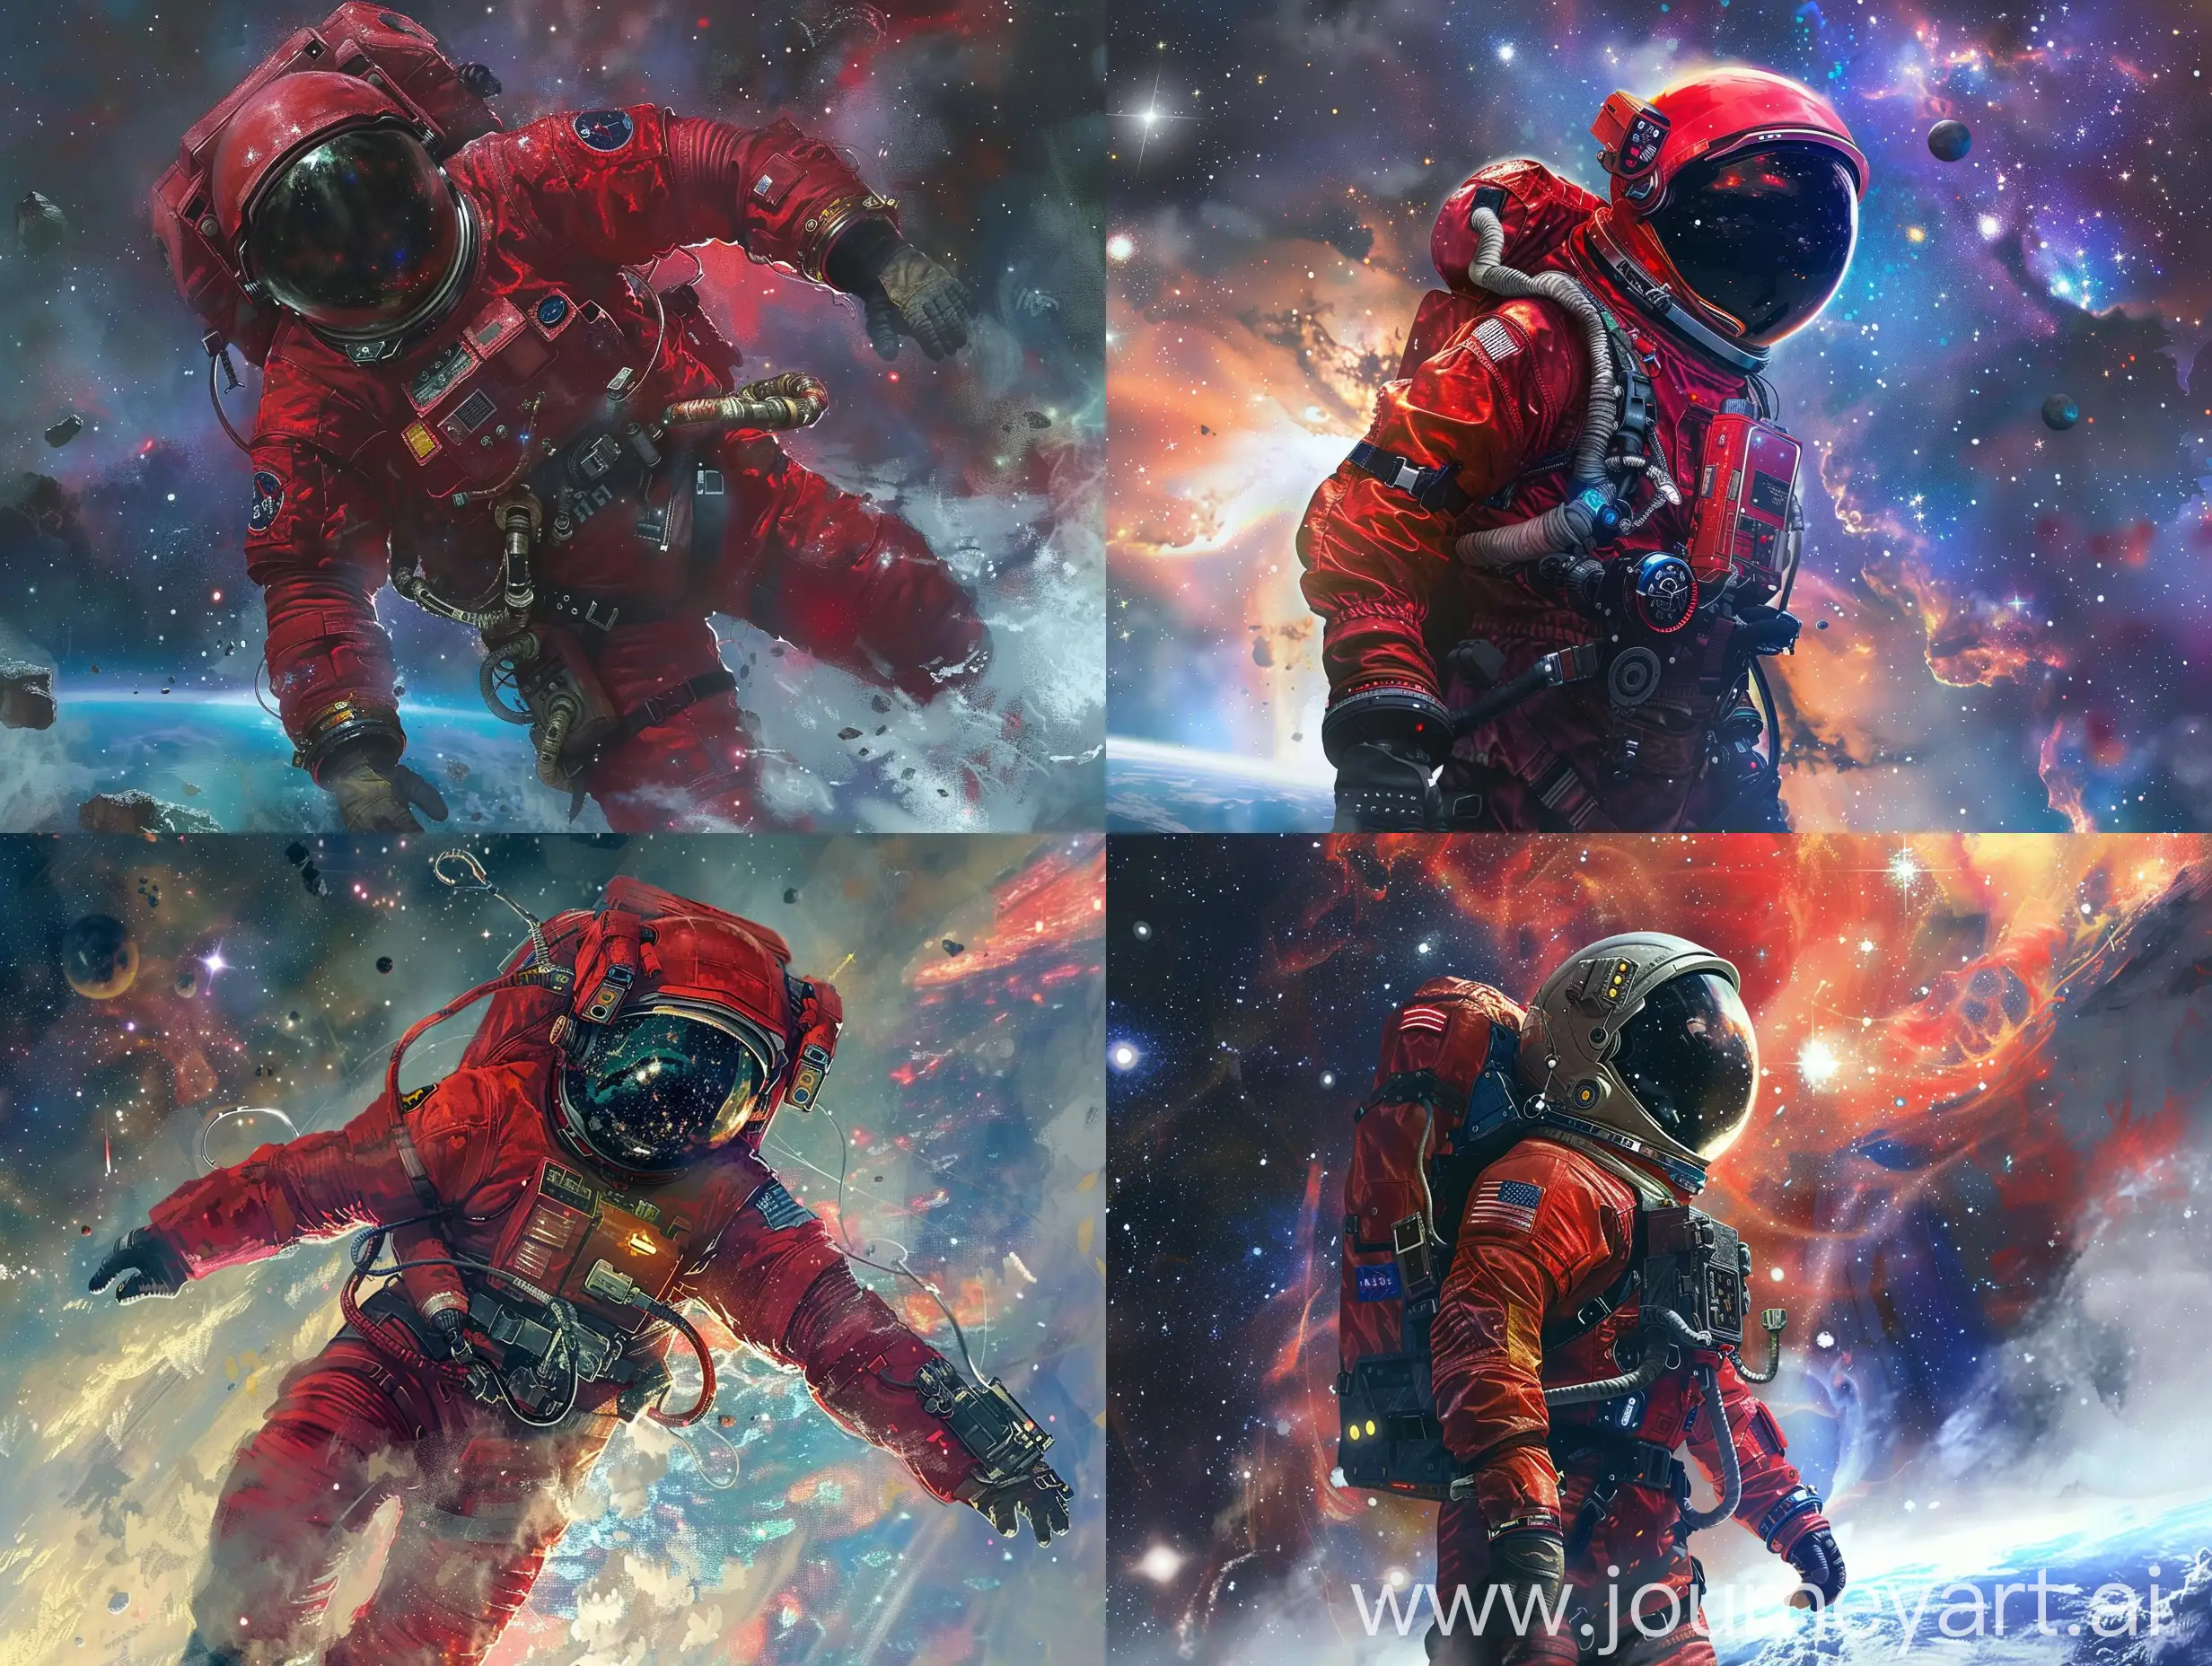 Create concept art depicting an astronaut clad in a striking red astro suit, equipped with advanced high-tech gear, navigating the vast expanse of space. The astronaut should exude a sense of exploration and curiosity as they venture into the unknown reaches of the cosmos. Incorporate elements such as distant galaxies, nebulae, and celestial bodies to emphasize the vastness and wonder of outer space. Capture the essence of discovery and adventure as the astronaut boldly explores uncharted territories beyond the reaches of Earth.